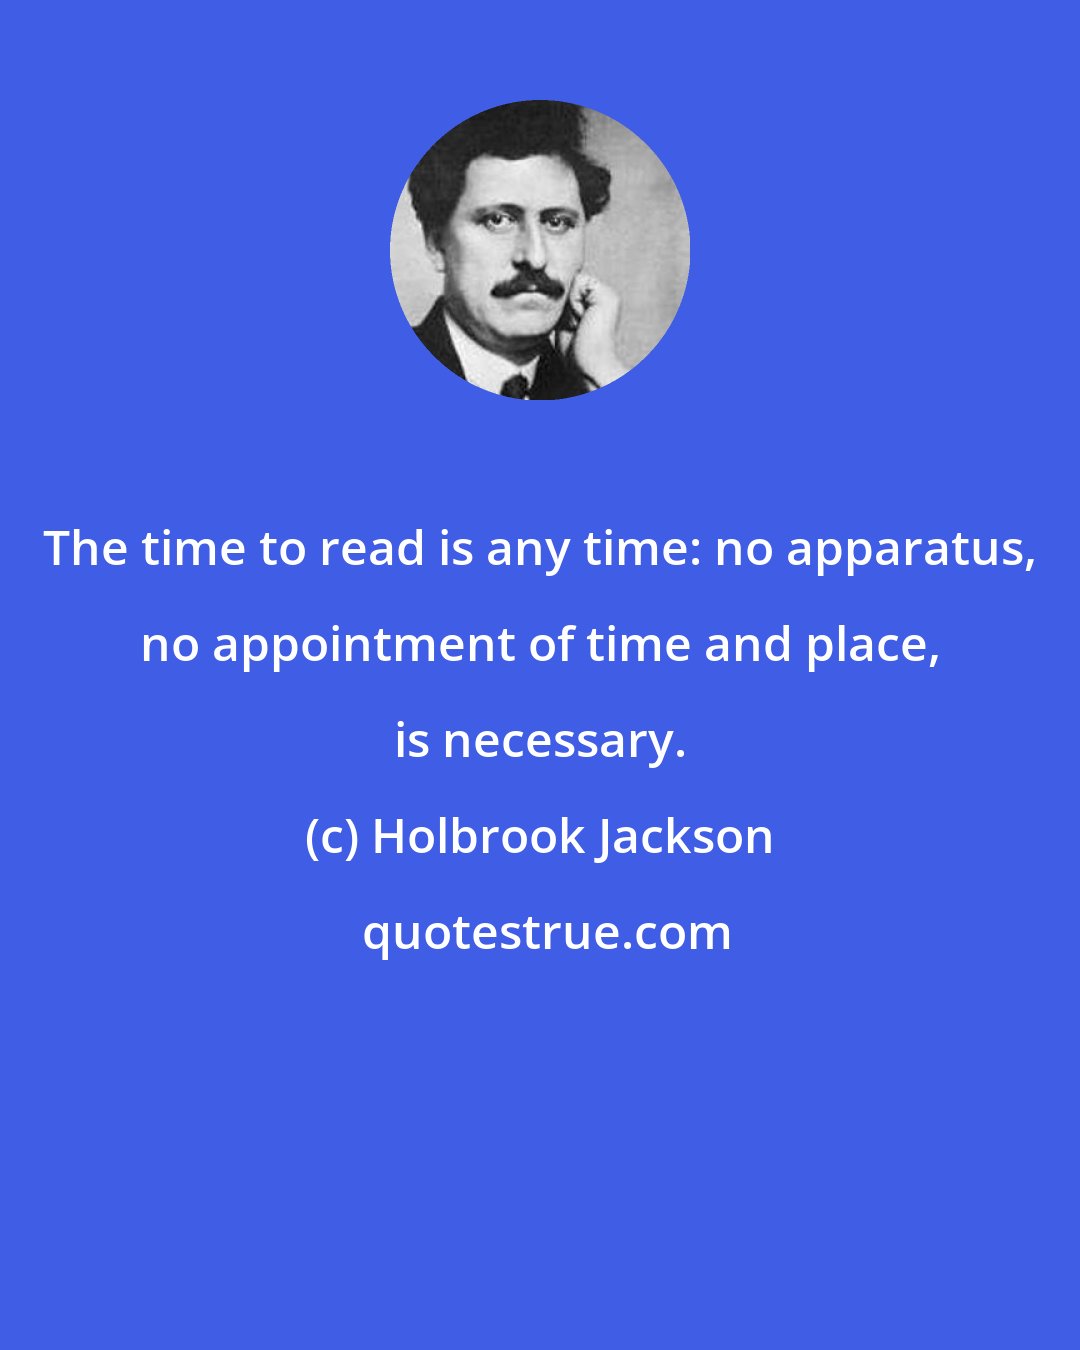 Holbrook Jackson: The time to read is any time: no apparatus, no appointment of time and place, is necessary.